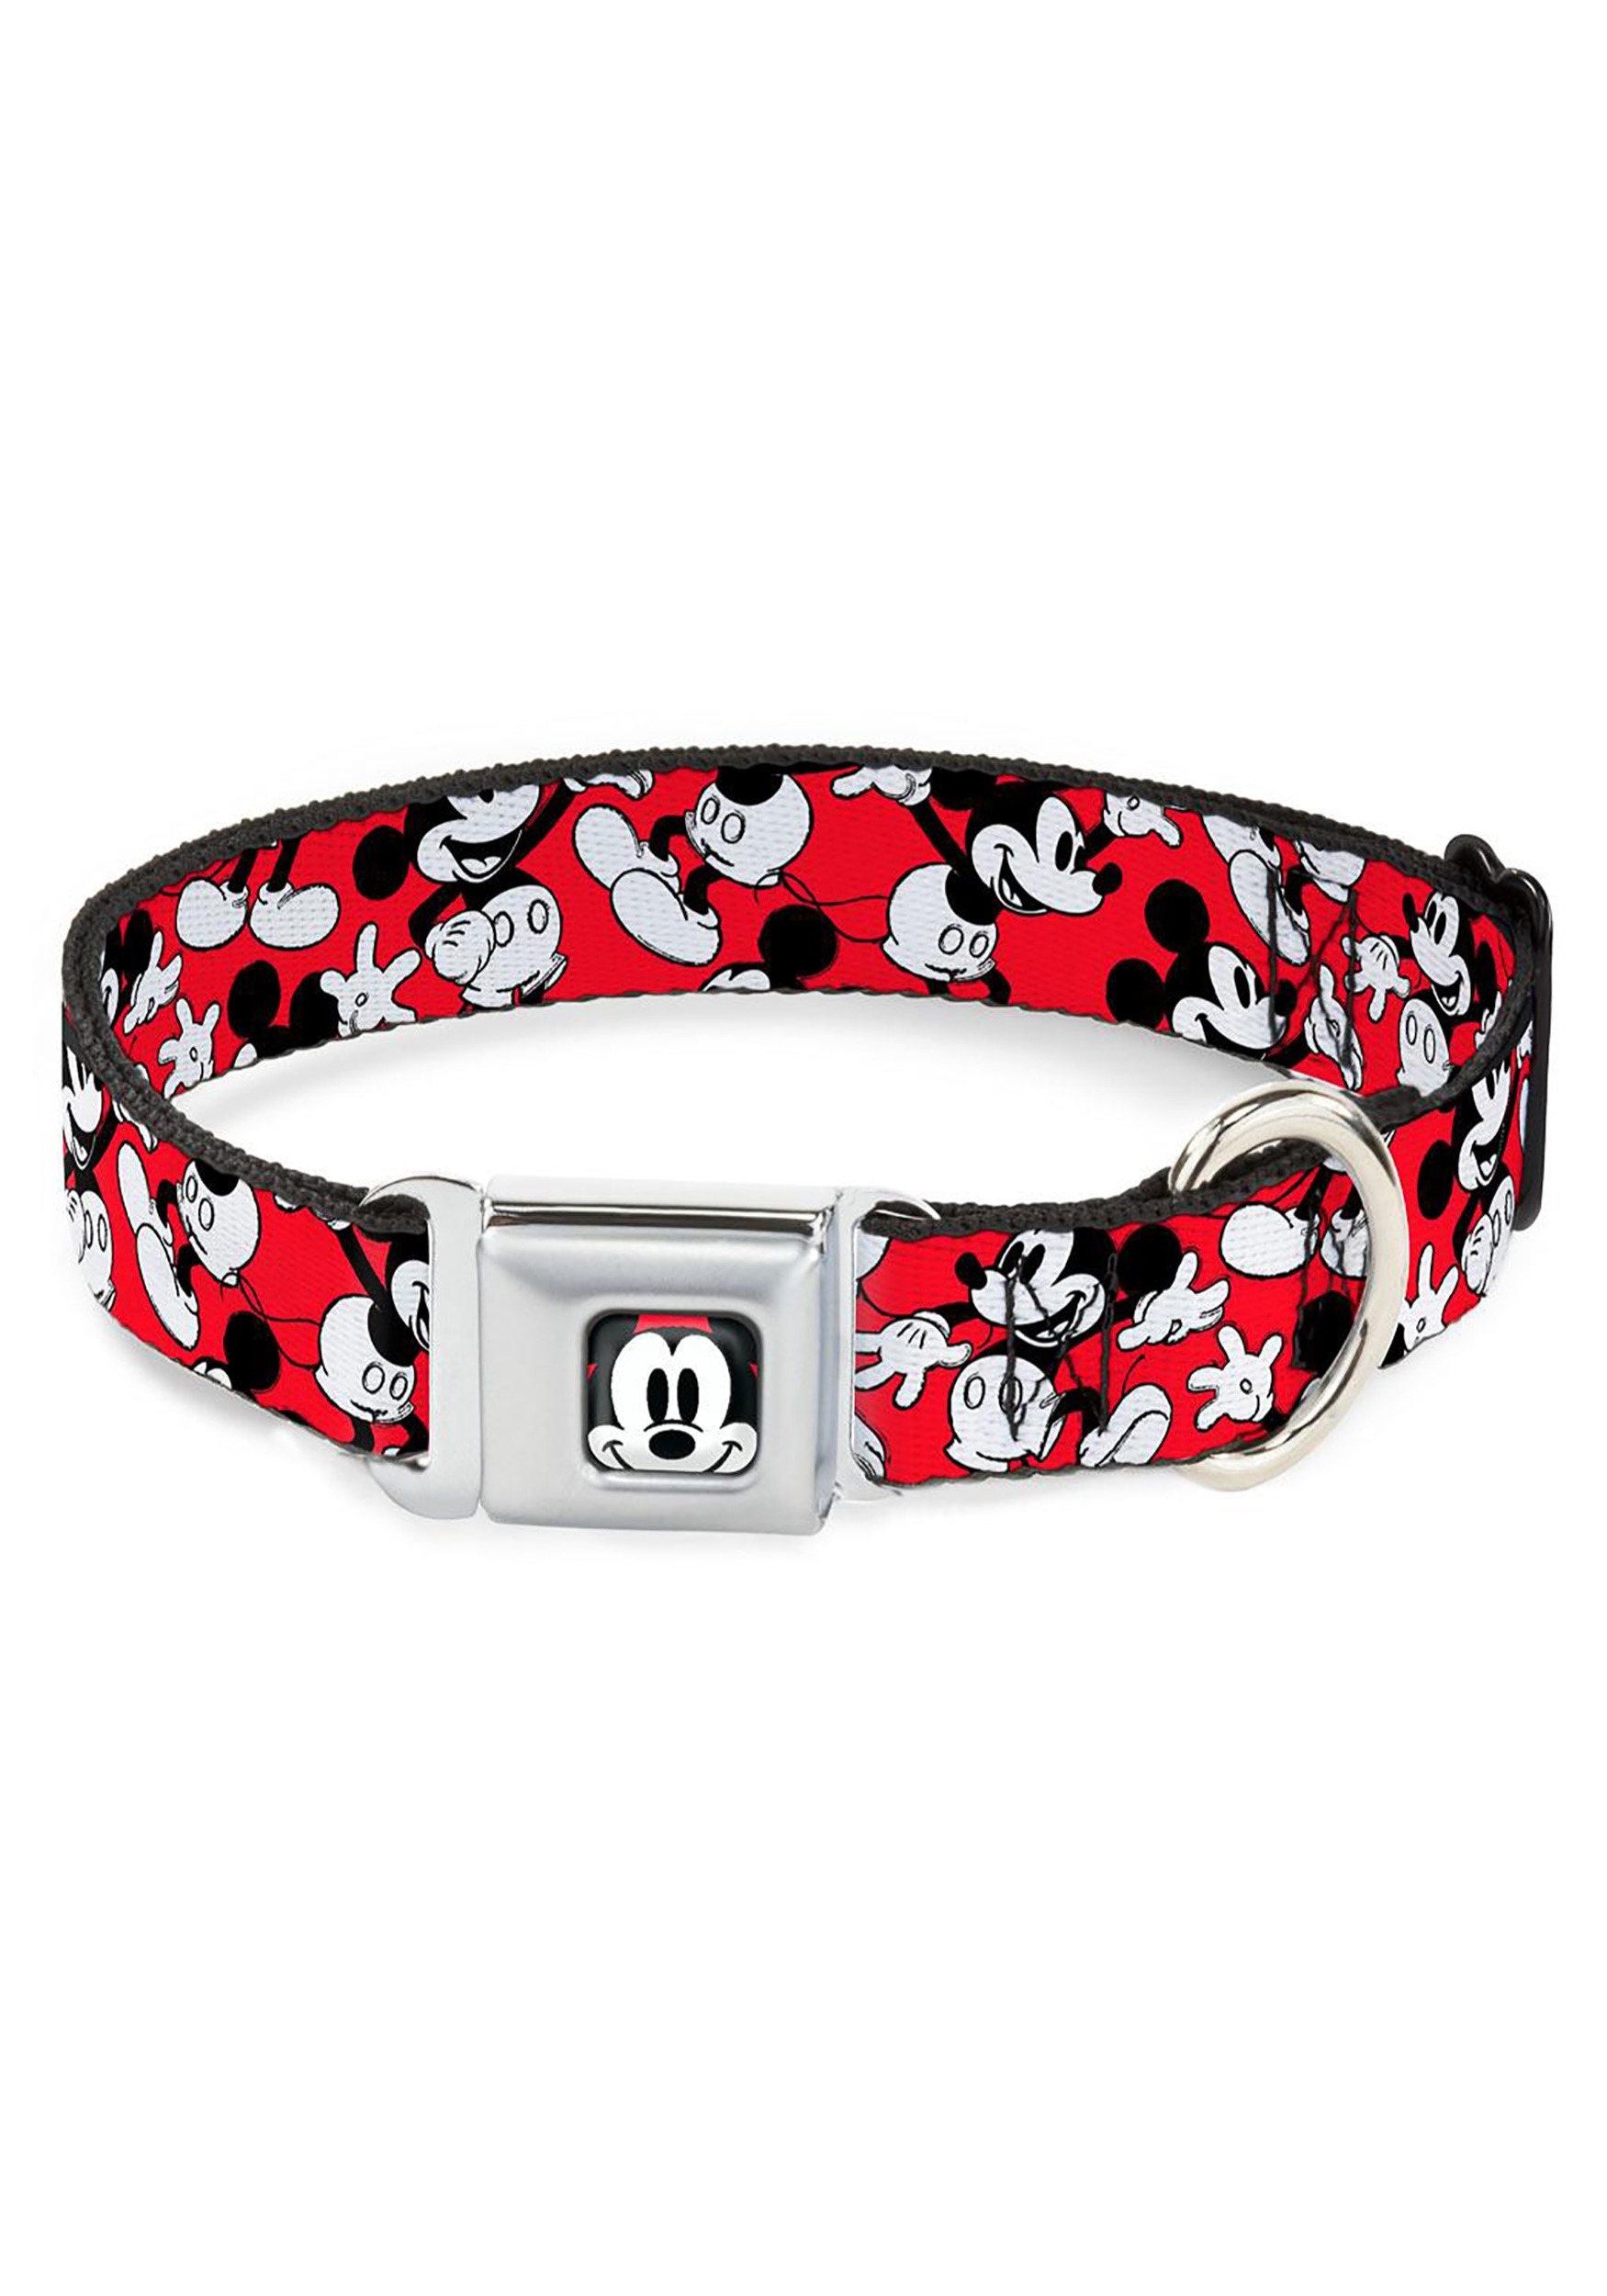 mickey mouse dog collars